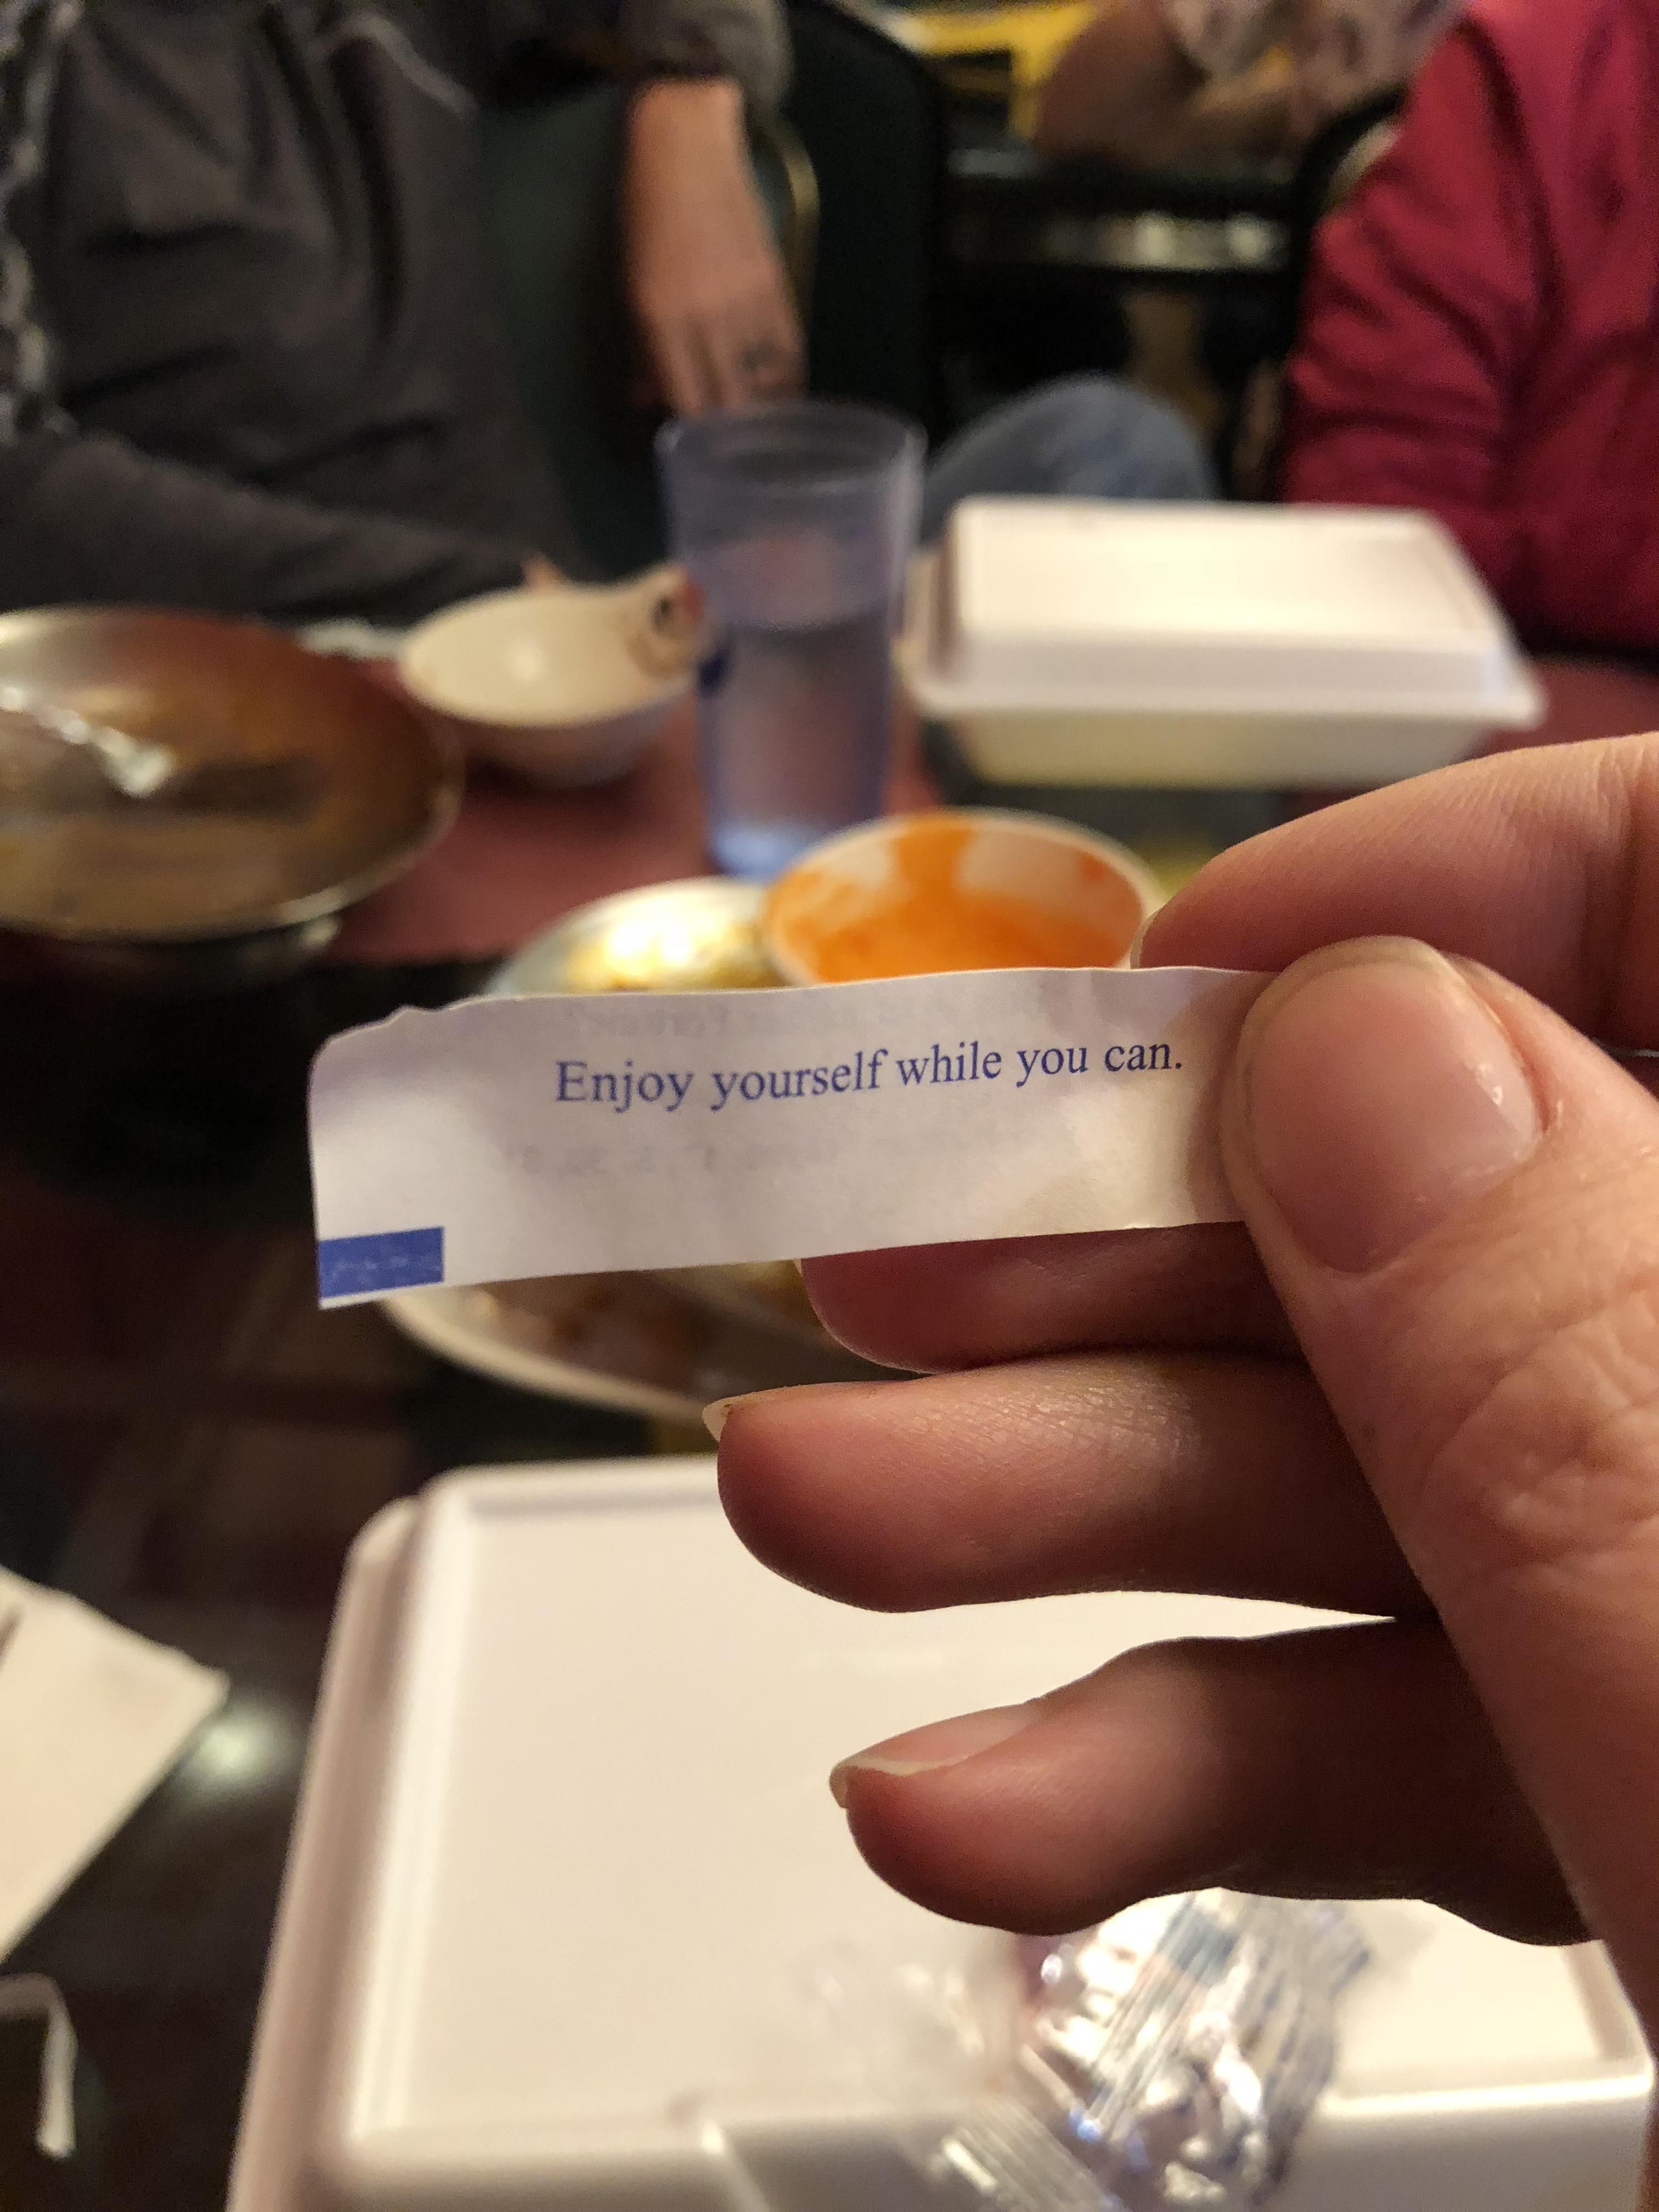 I get married on Saturday and this was my dinner fortune cookie tonight.